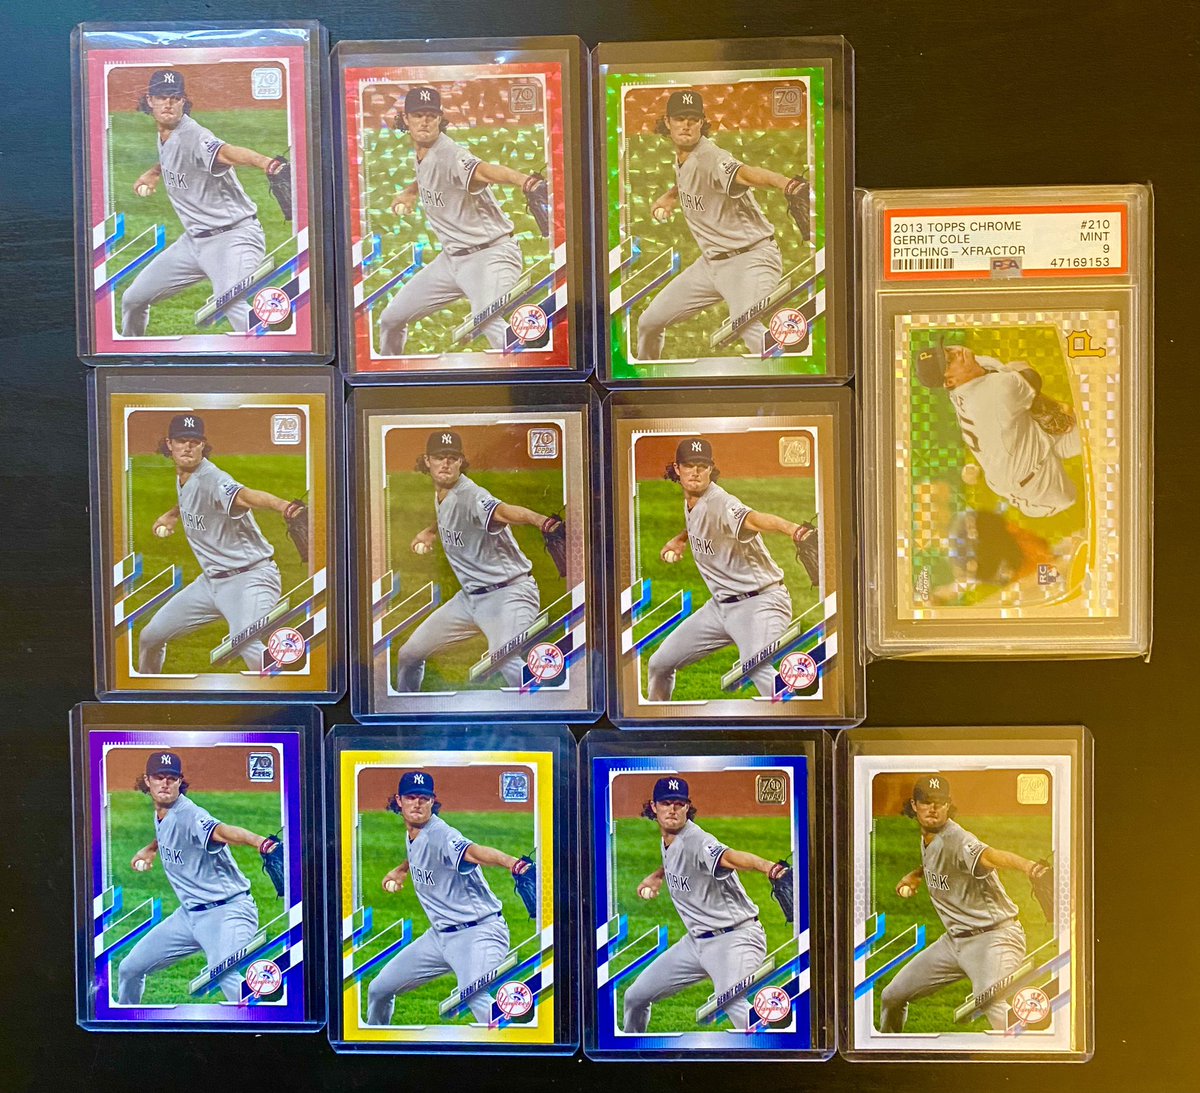 RT @Piotrs_Cards: Gerrit Cole 2021 rainbow lot and Xfractor rookie PSA 9 $110 shipped @HobbyConnector @SportsSell3 https://t.co/RaIROhrJ4u